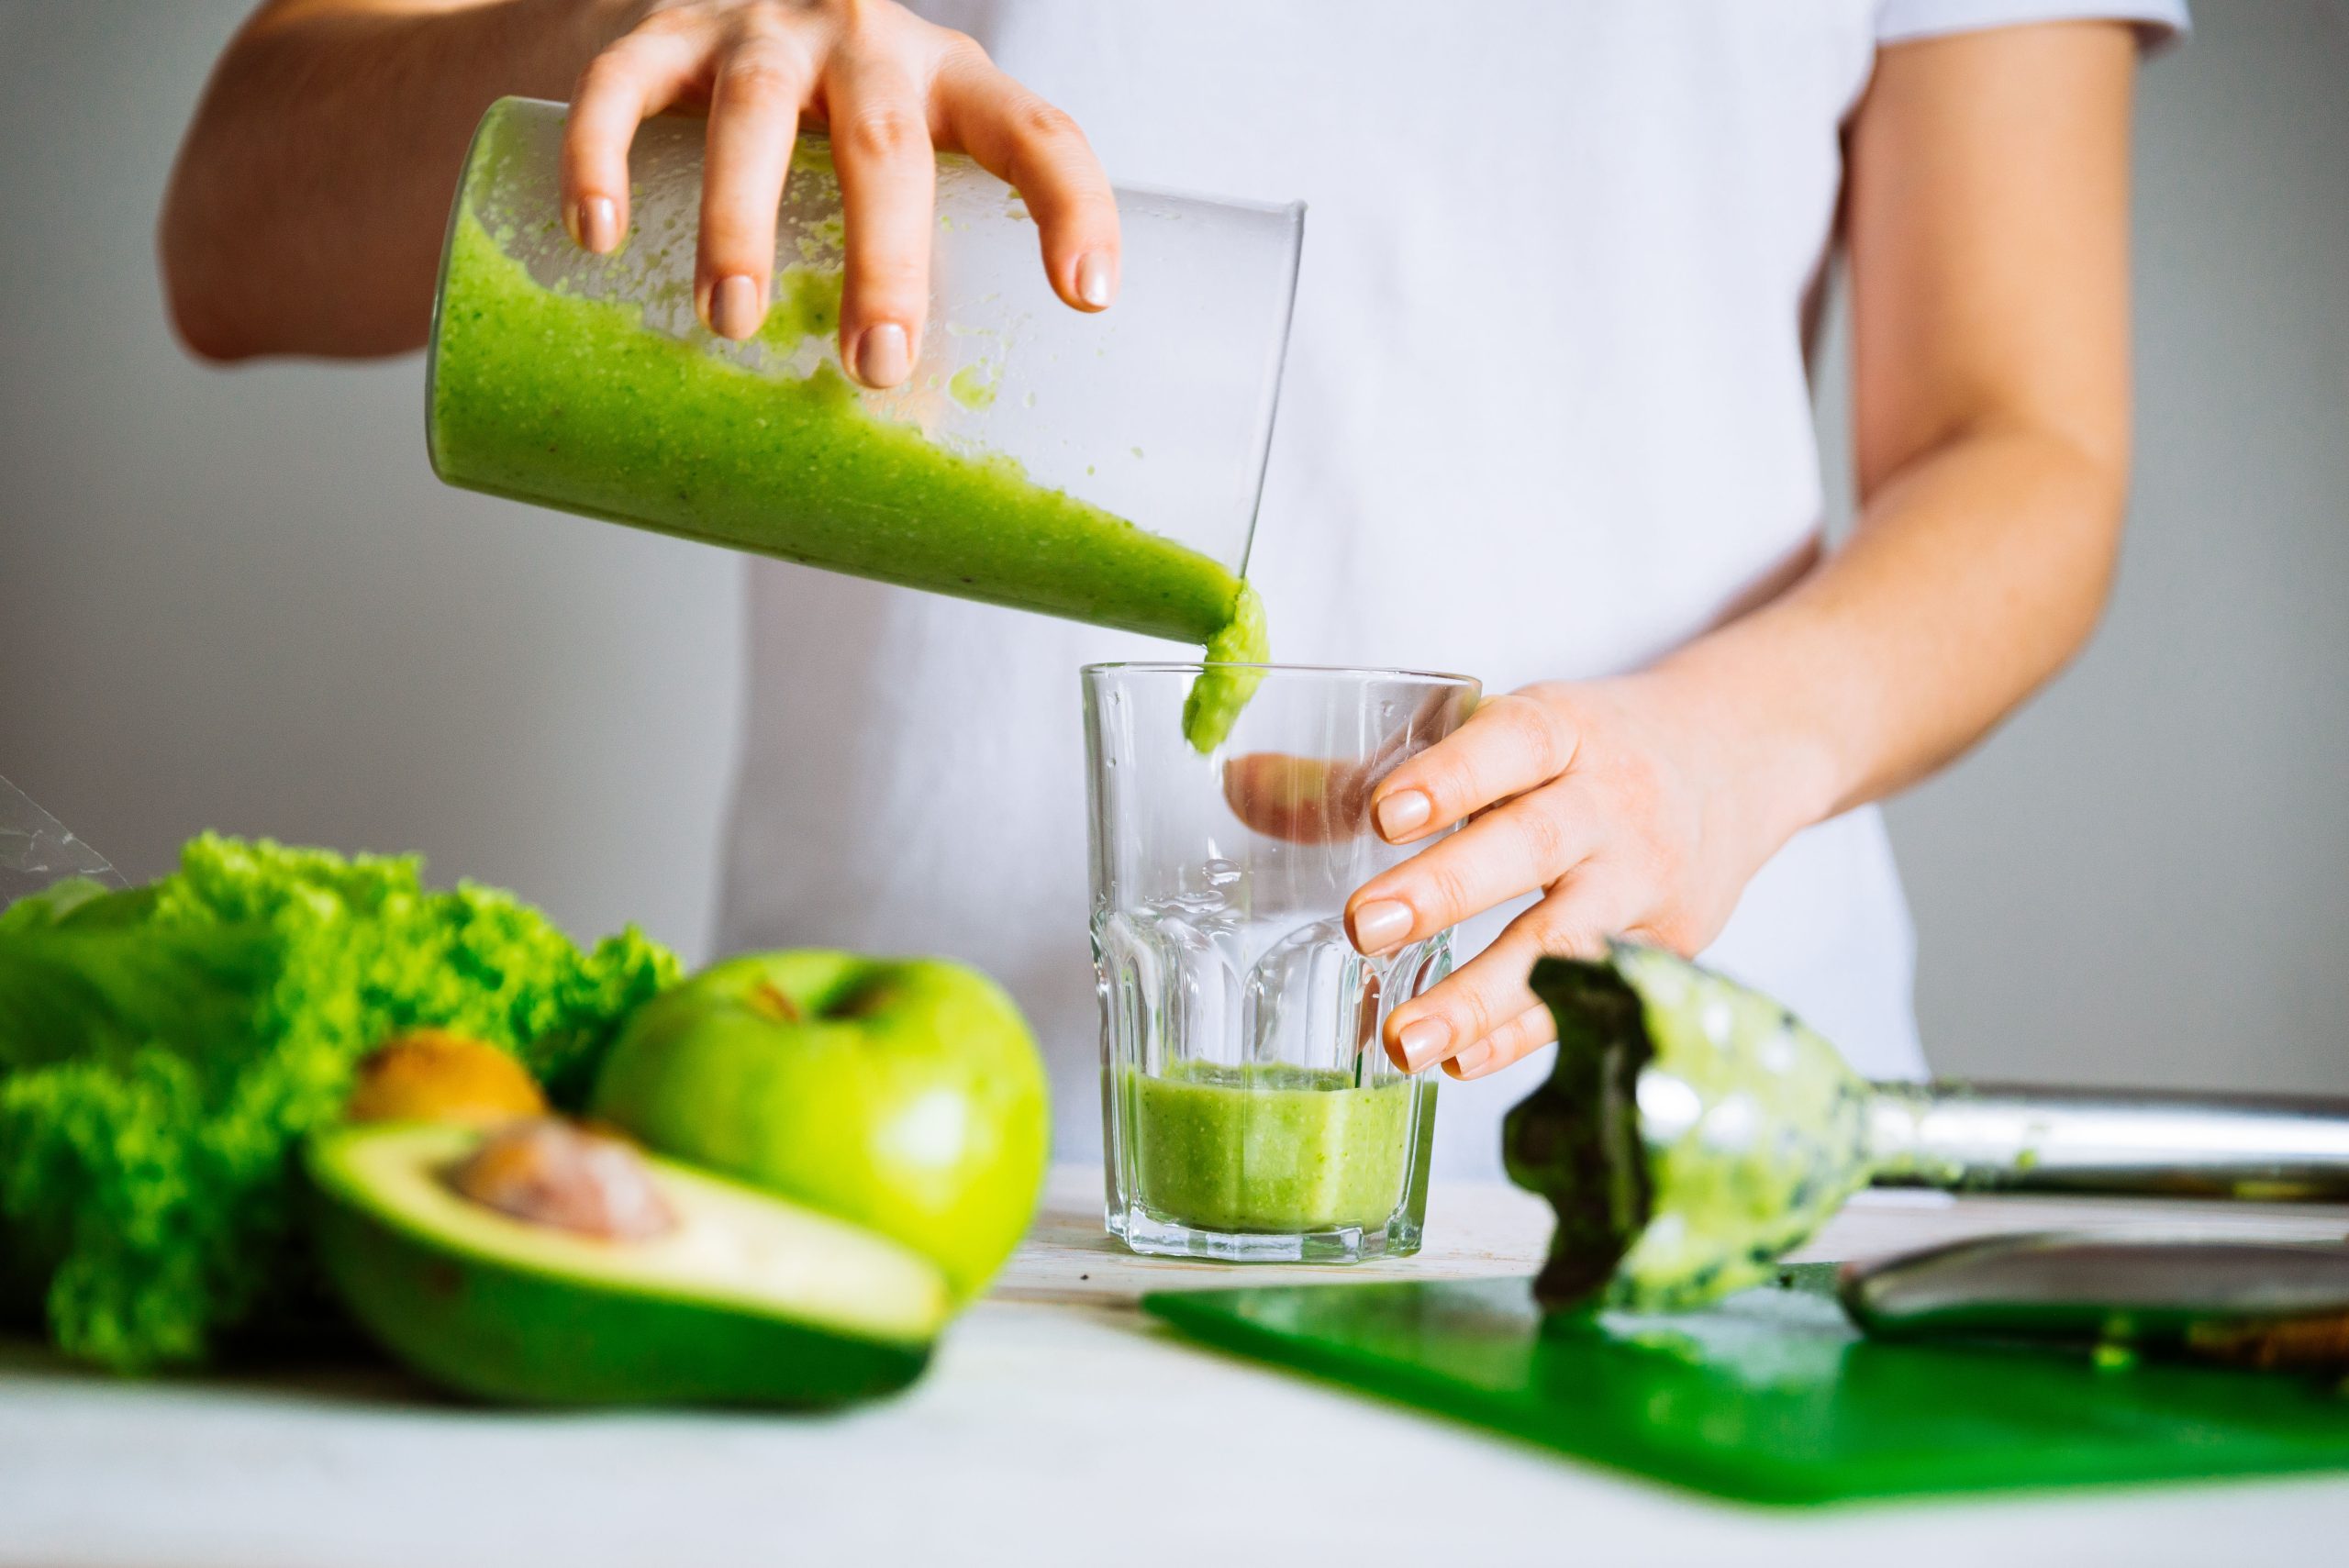 A person pouring a vibrant green smoothie into a clear glass, with fresh green apples, half an avocado, and leafy greens on a cutting board in the background, signifying fresh, healthy ingredients.